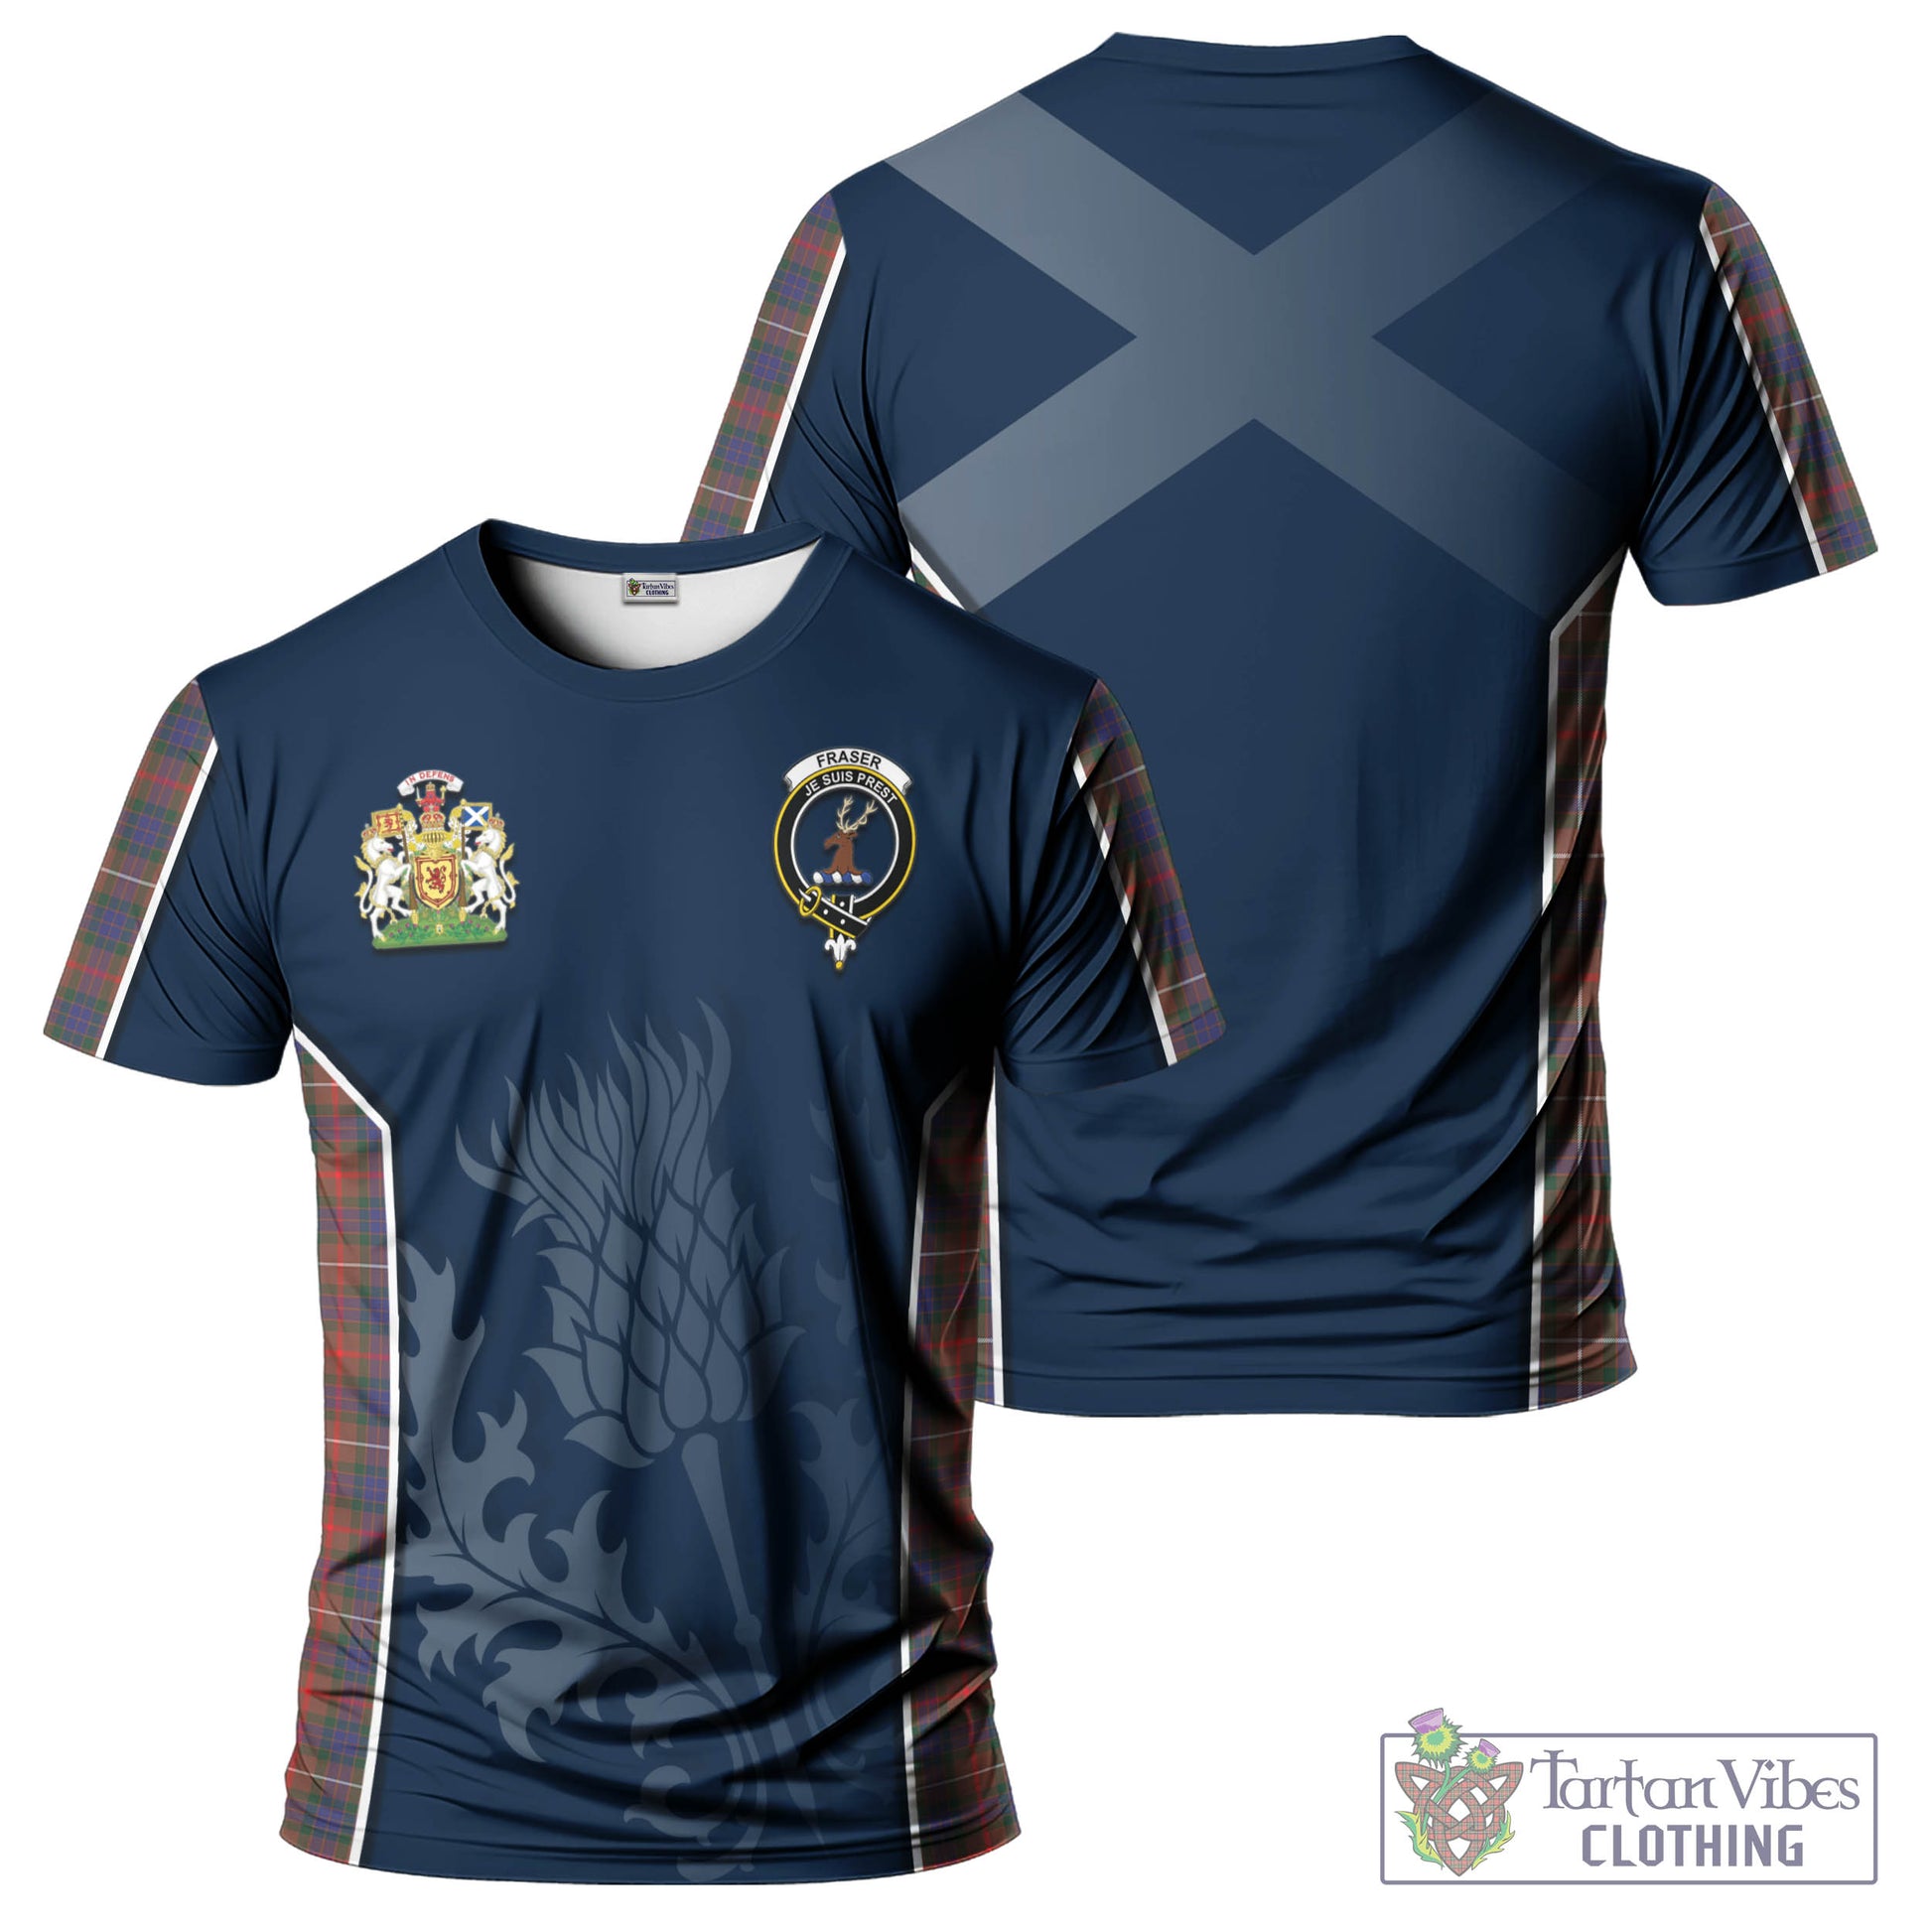 Tartan Vibes Clothing Fraser Hunting Modern Tartan T-Shirt with Family Crest and Scottish Thistle Vibes Sport Style